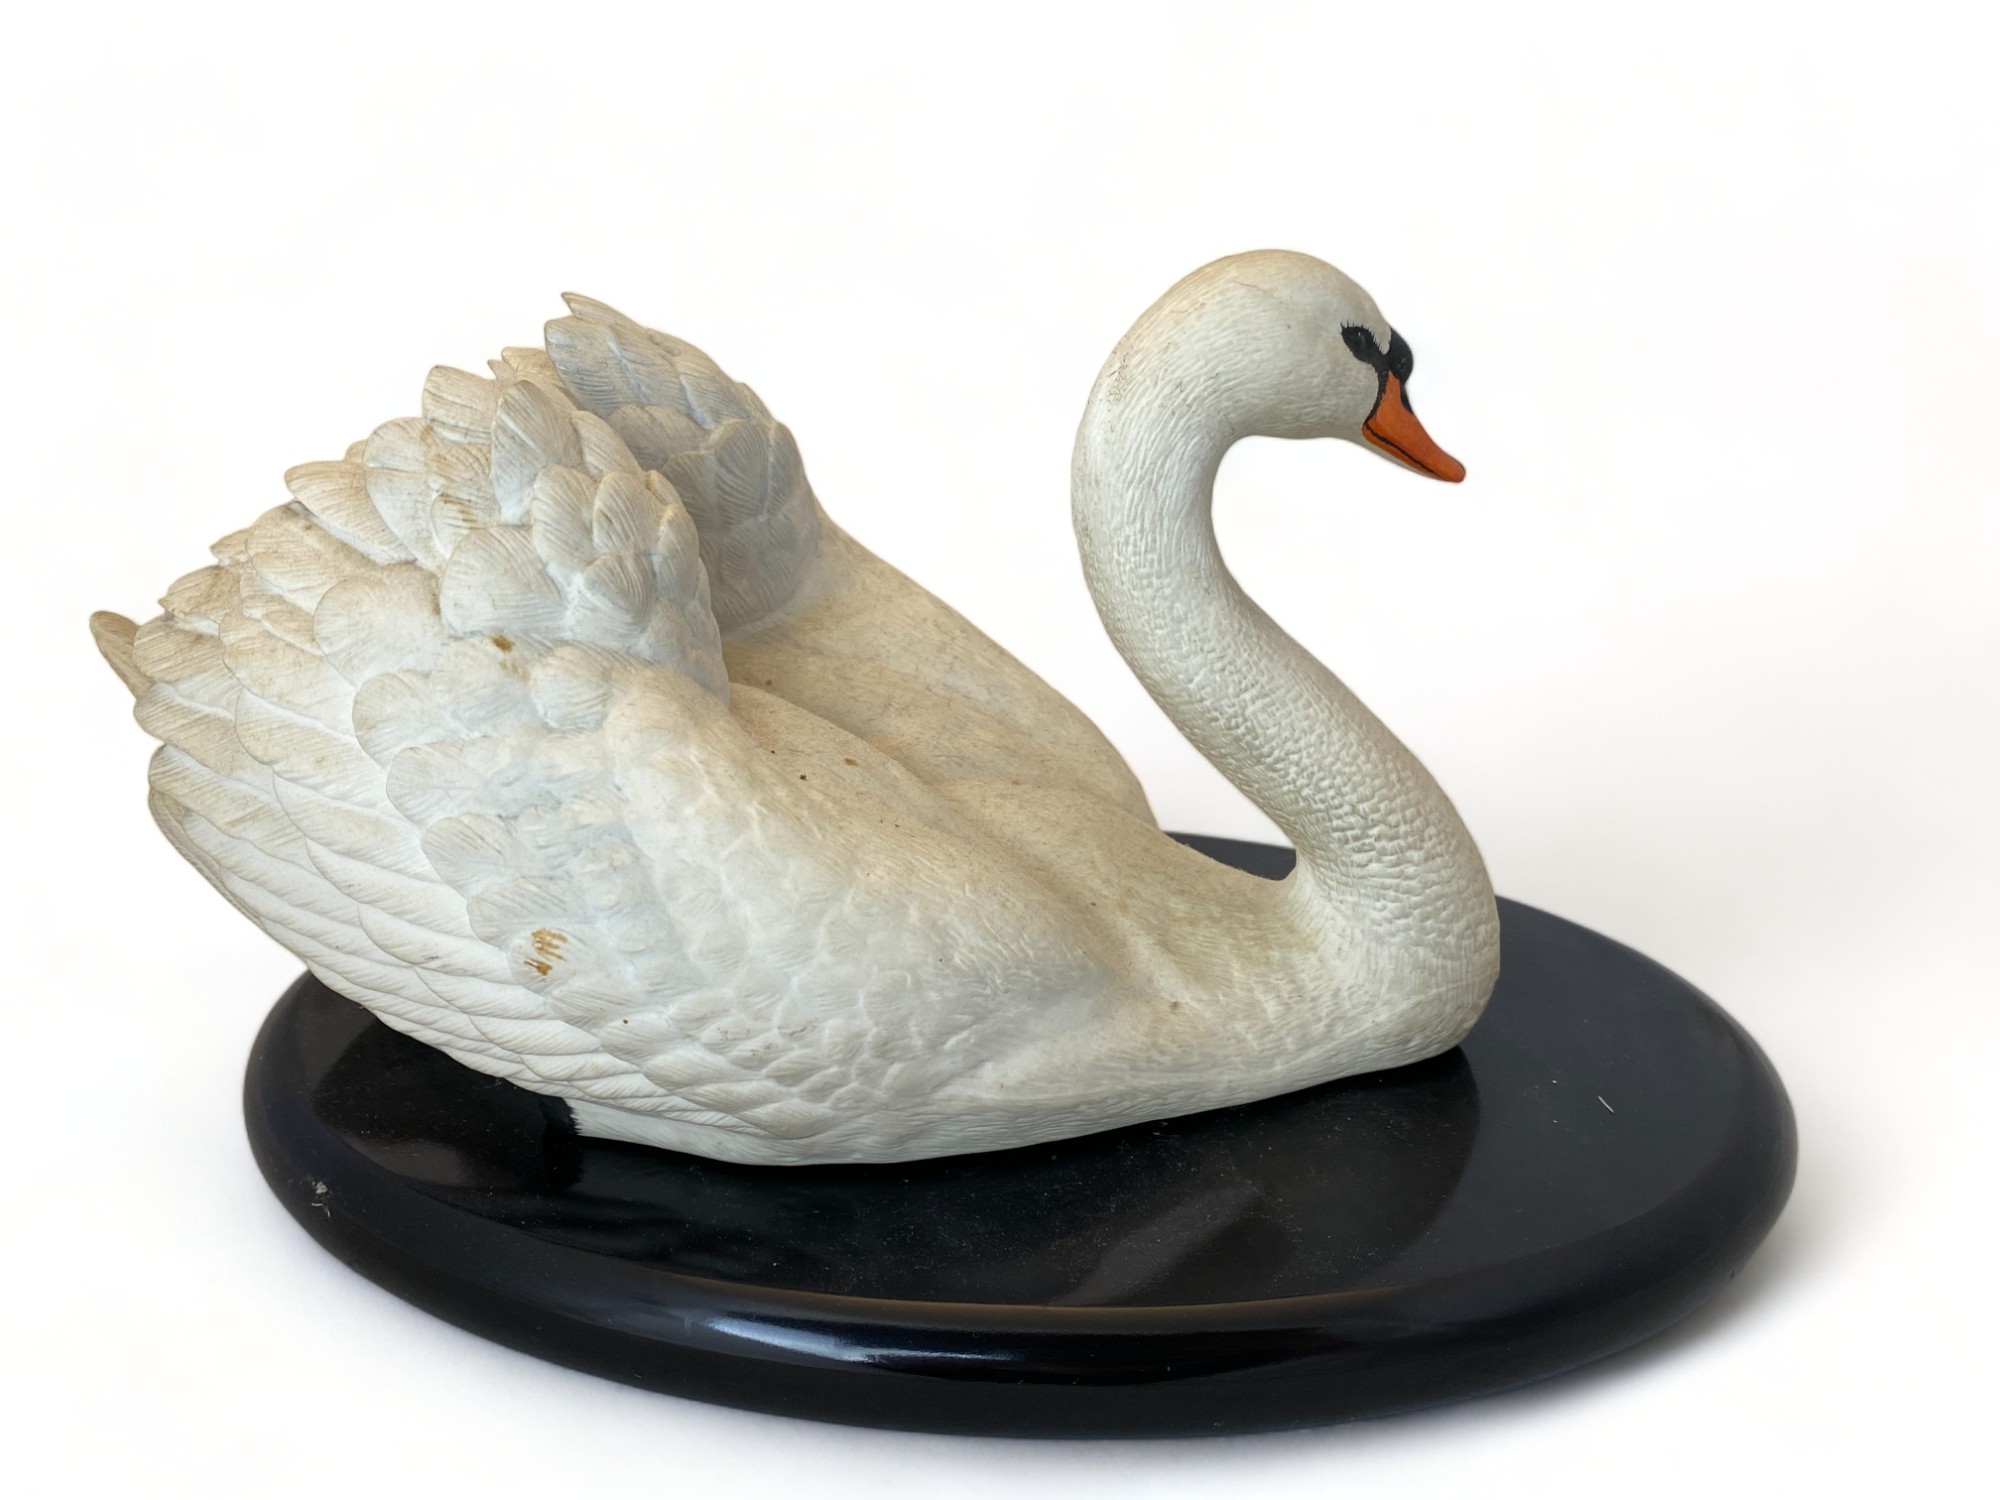 A Royal Doulton porcelain figure, 'The Boy Evacuee' and a Franklin Mint bisque porcelain 'Royal Swan - Image 9 of 13